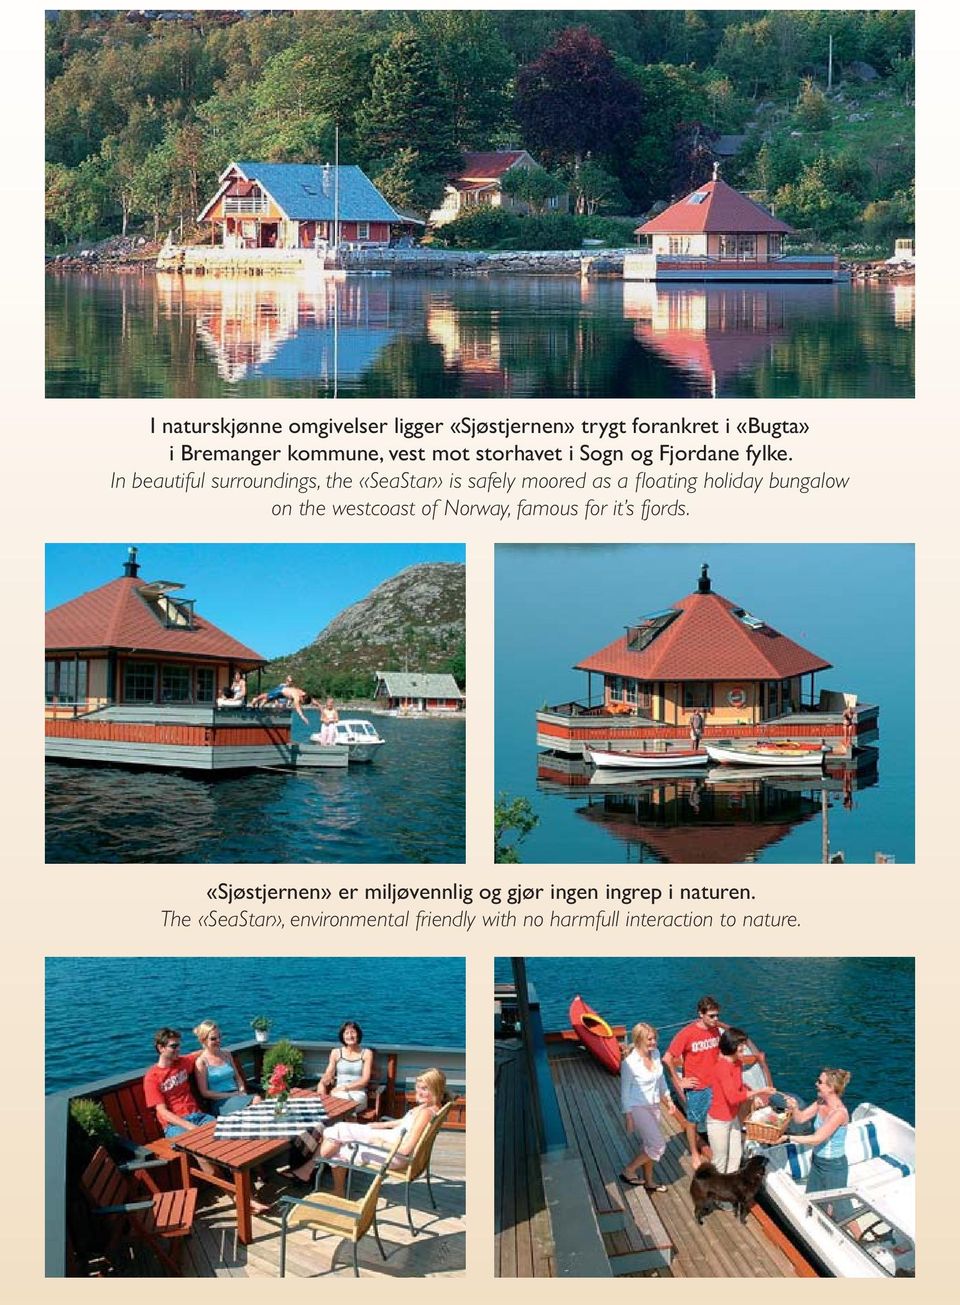 In beautiful surroundings, the «SeaStar» is safely moored as a fl oating holiday bungalow on the